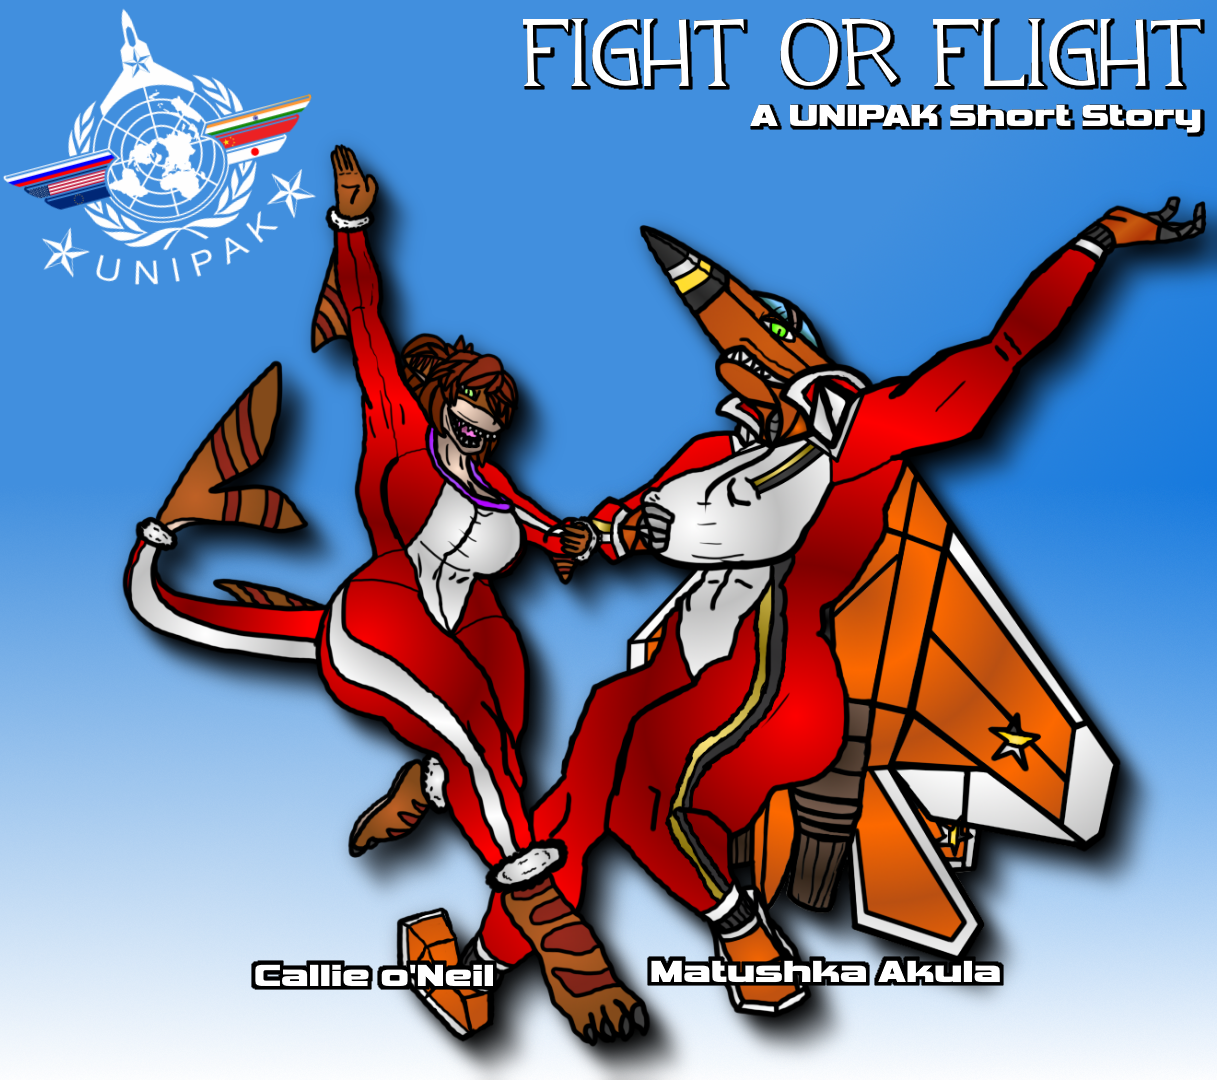 Flight for Fight - Download